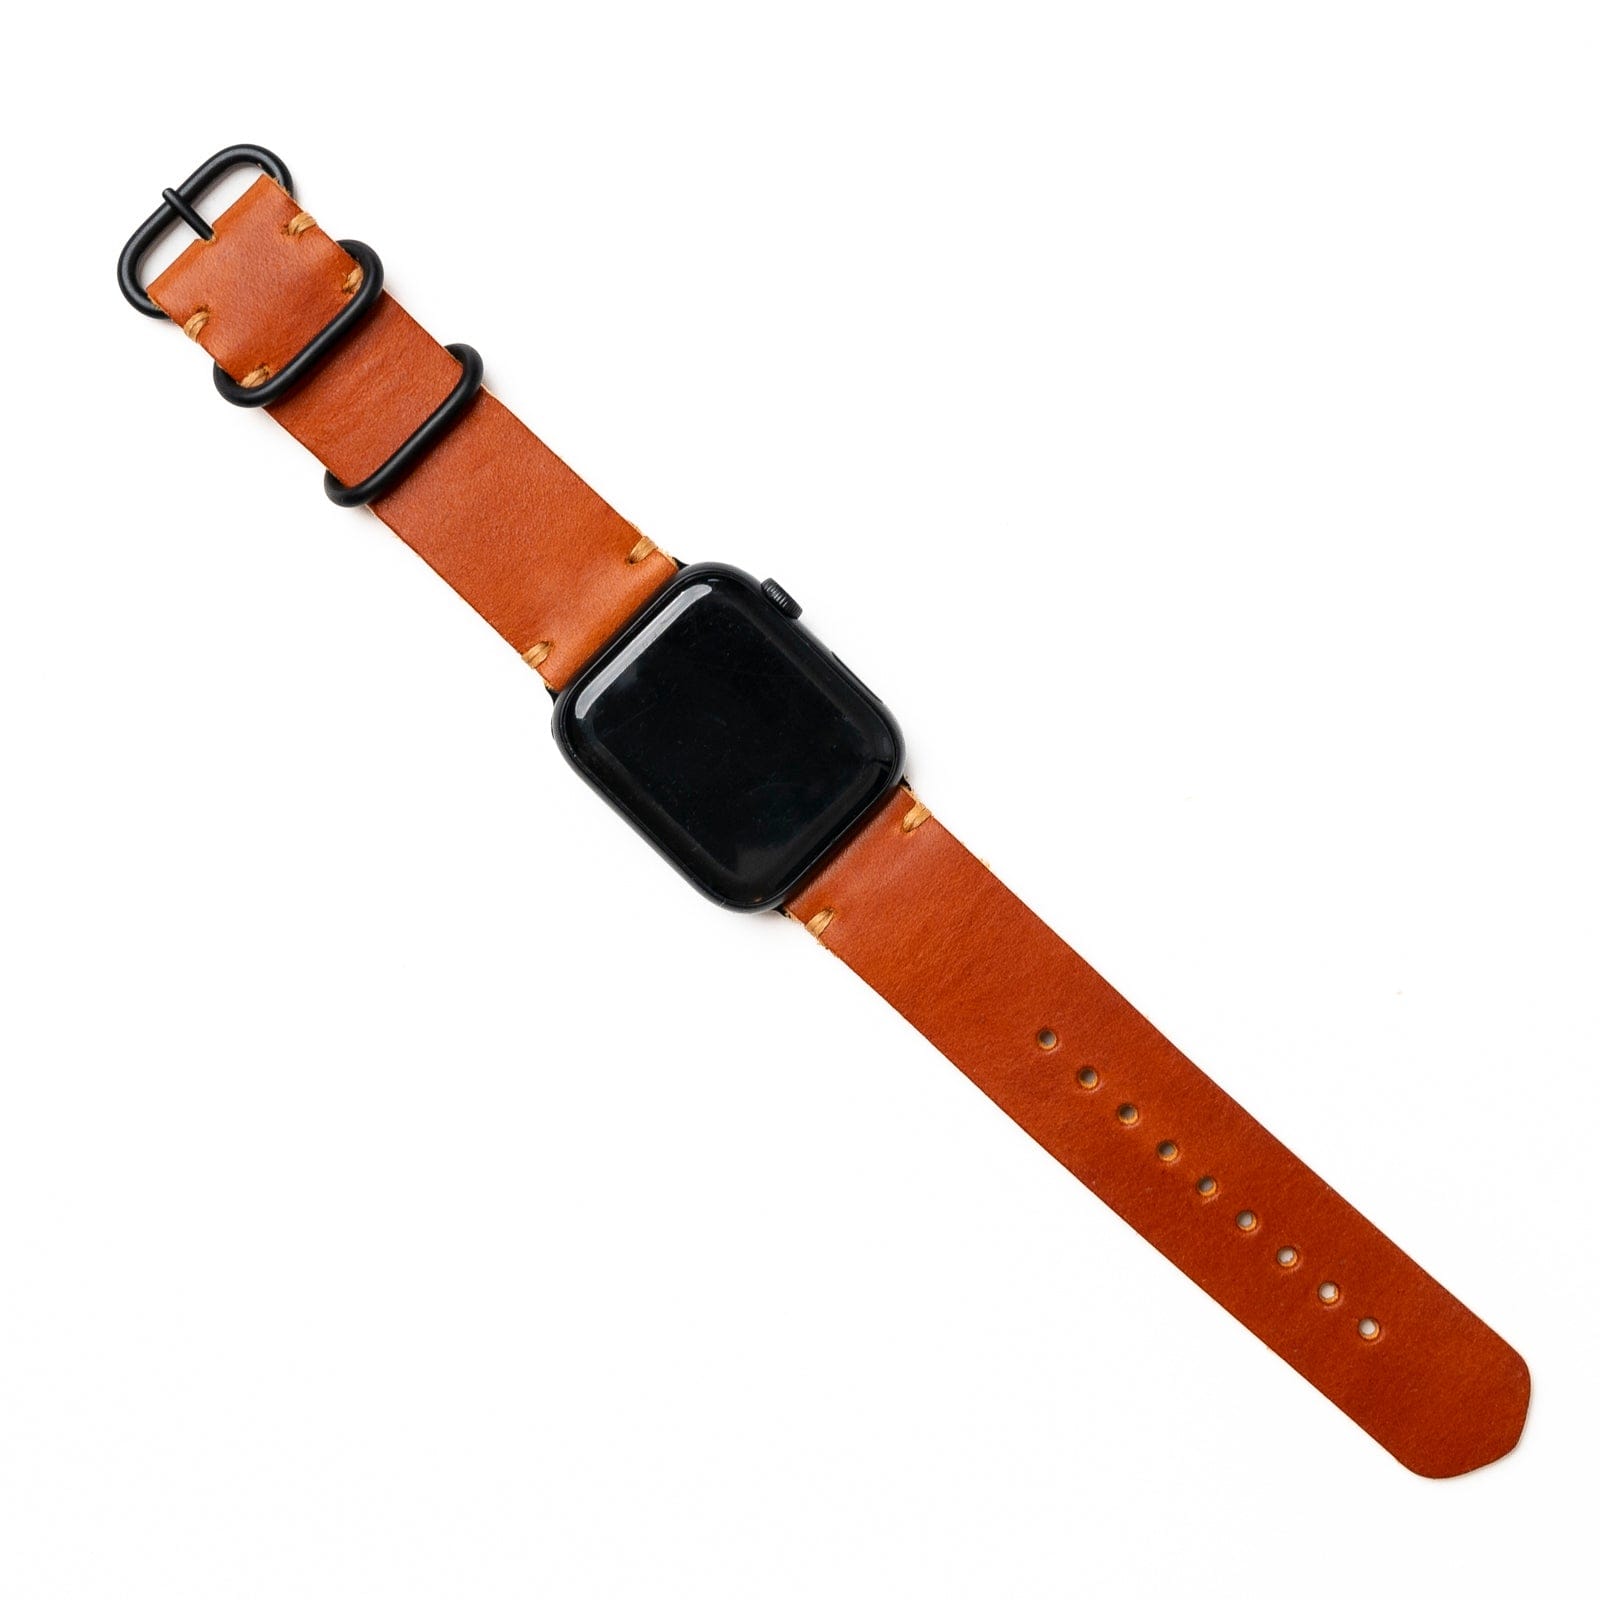 English Tan Apple Watch Band: Luxe Leather for a Refined Style